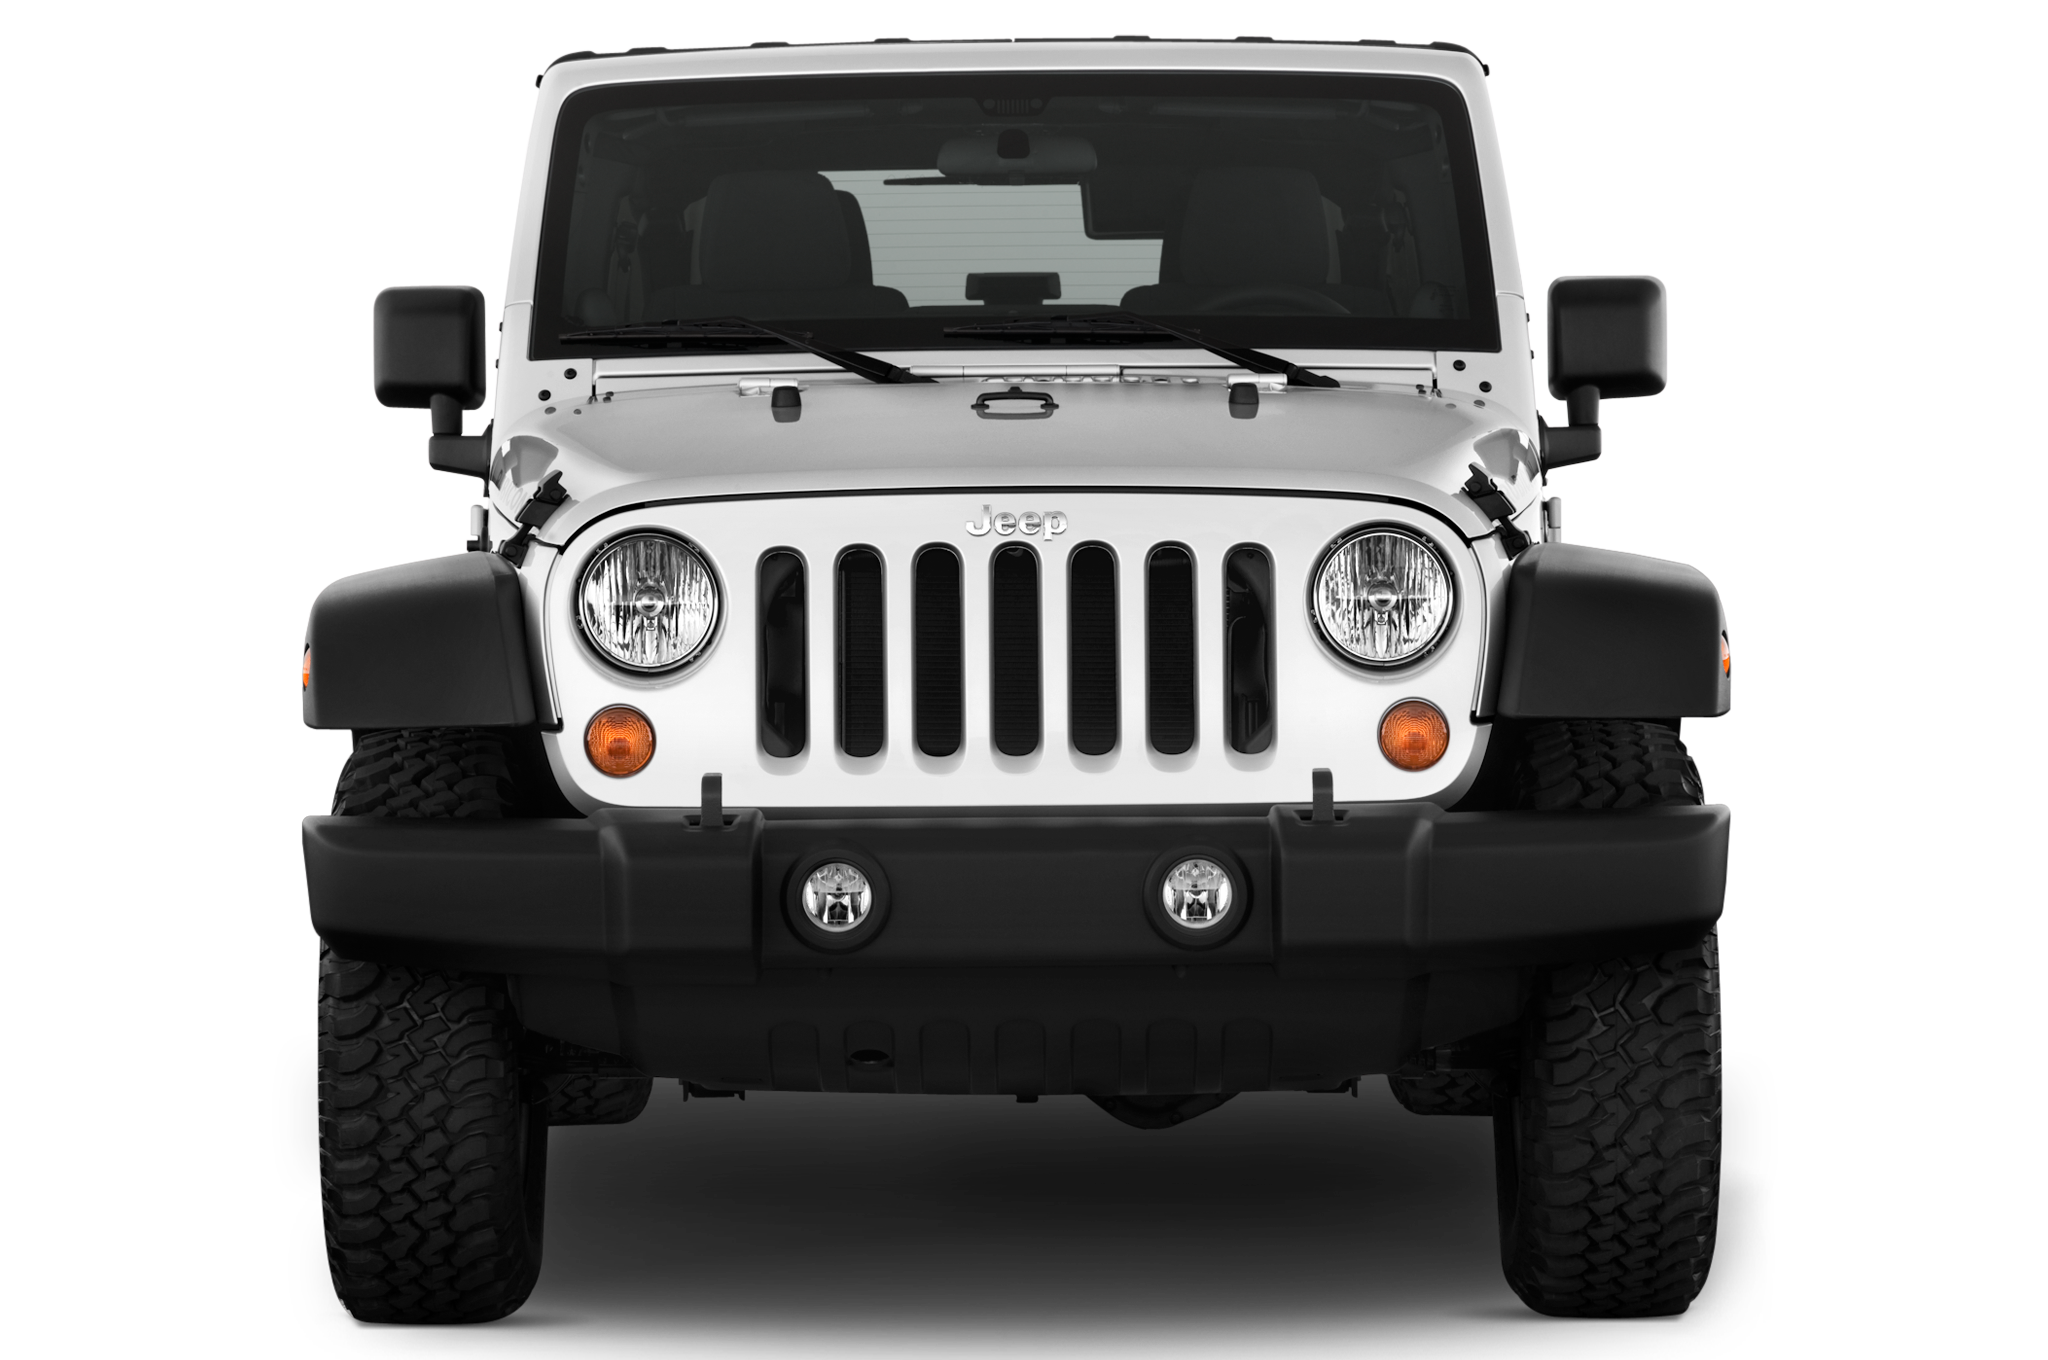 Jeep Wrangler Png Transparent Image Download Size 2048x1360px